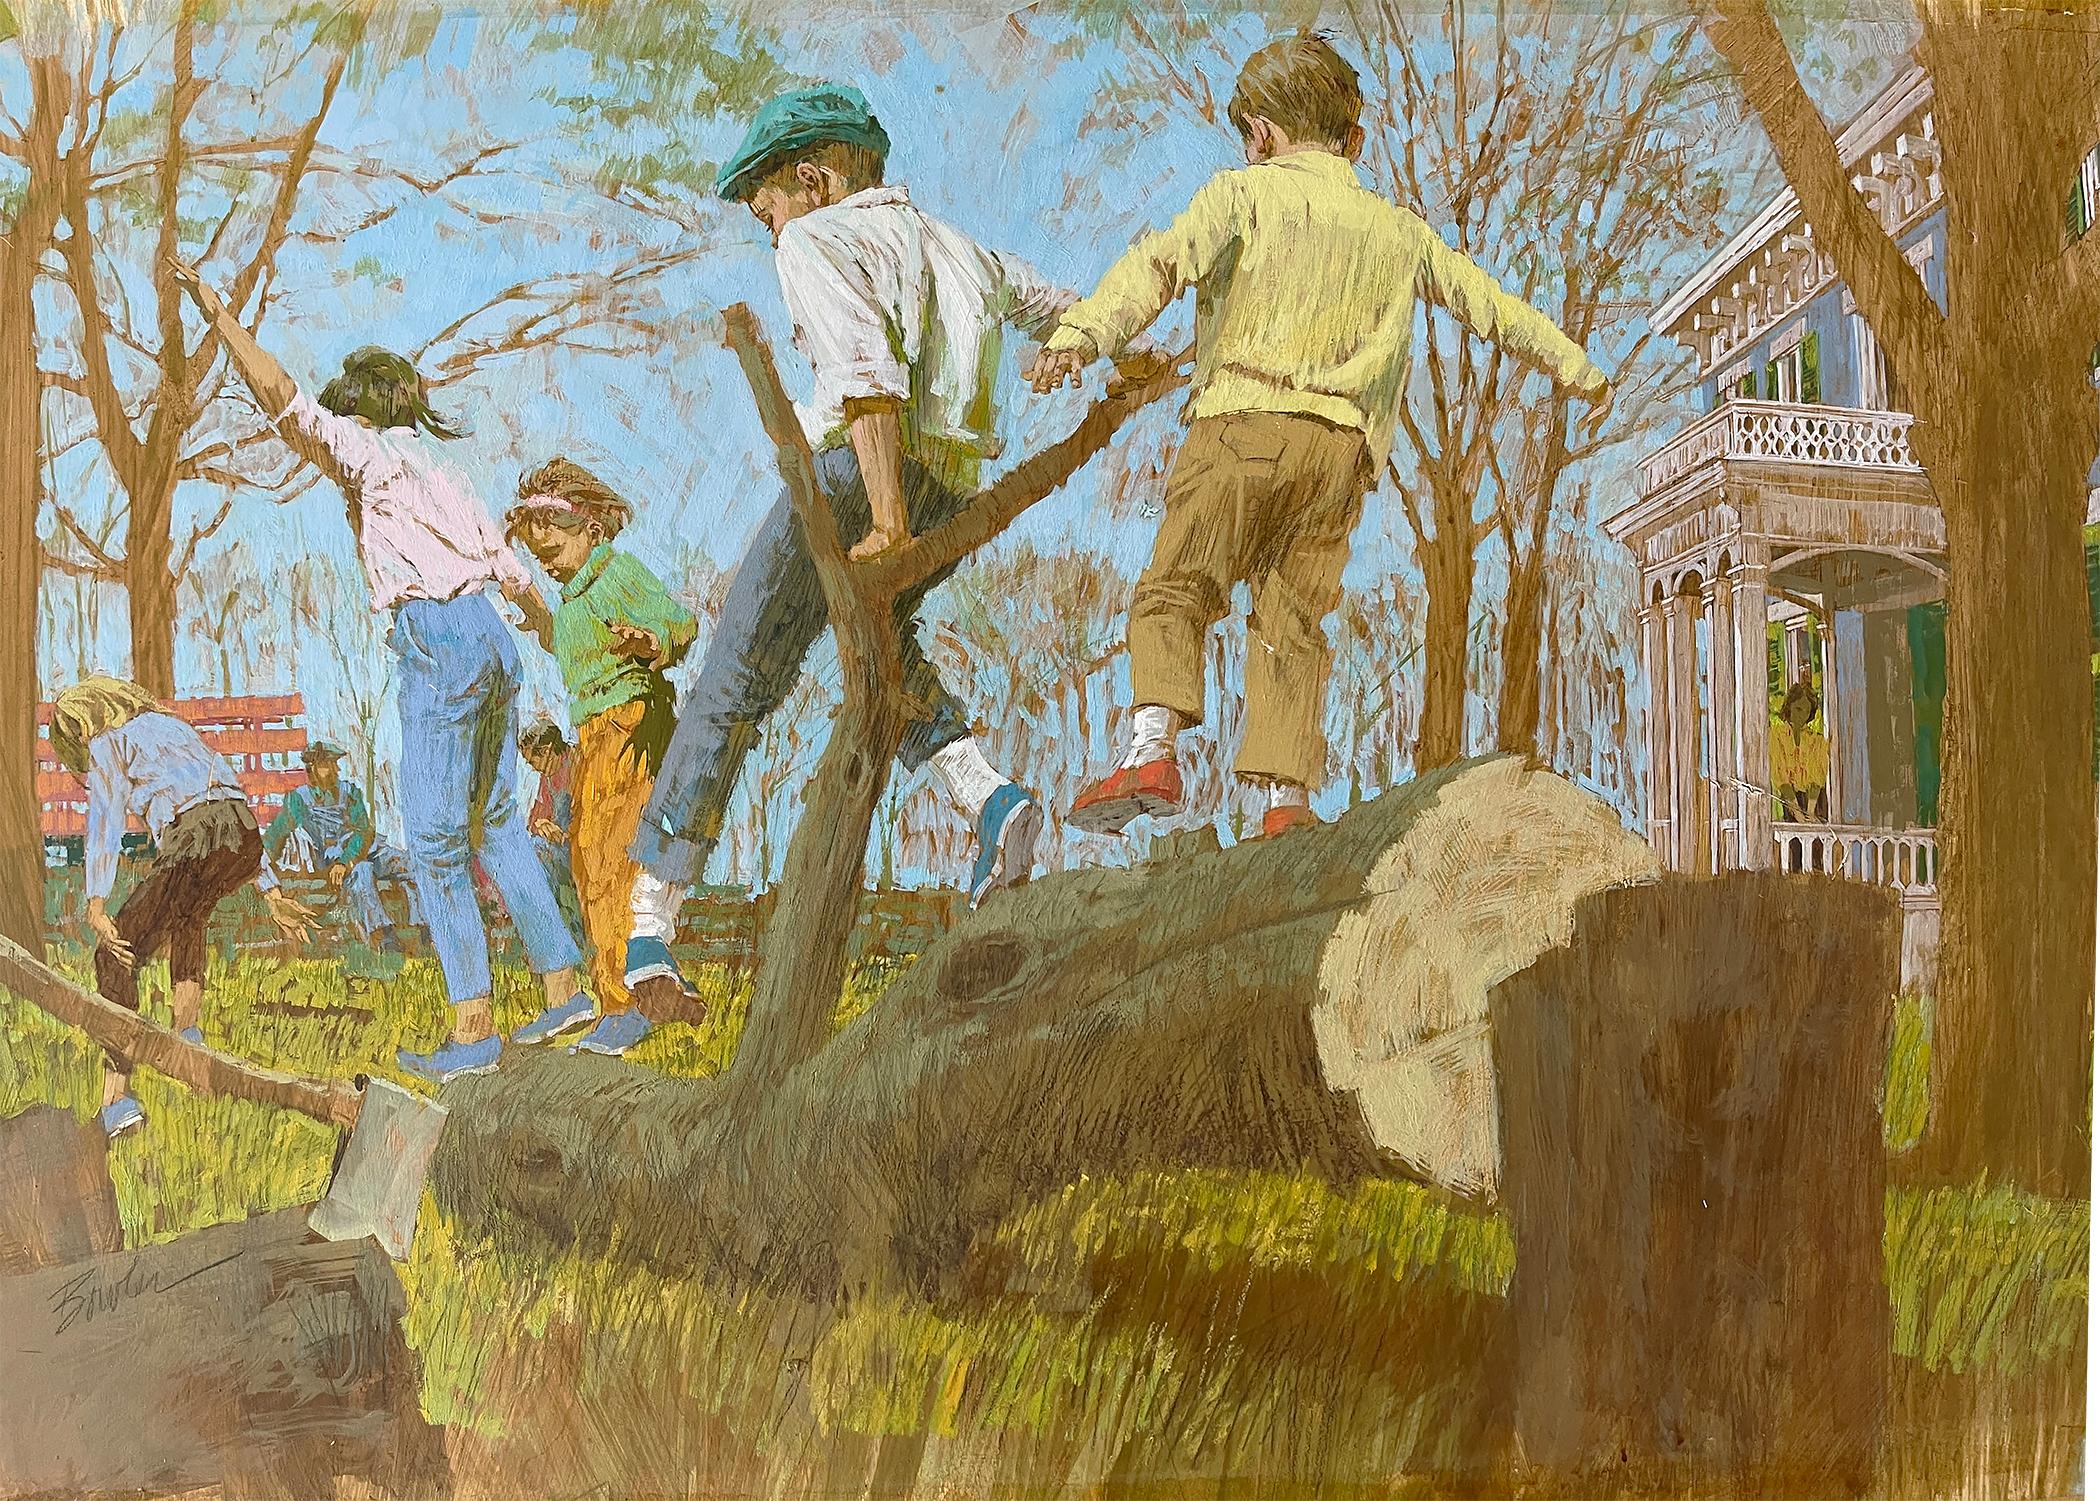 The Tree Cutters - Children Playing on a Fallen Tree - Saturday Evening Post? - Post-Impressionist Painting by Joe Bowler